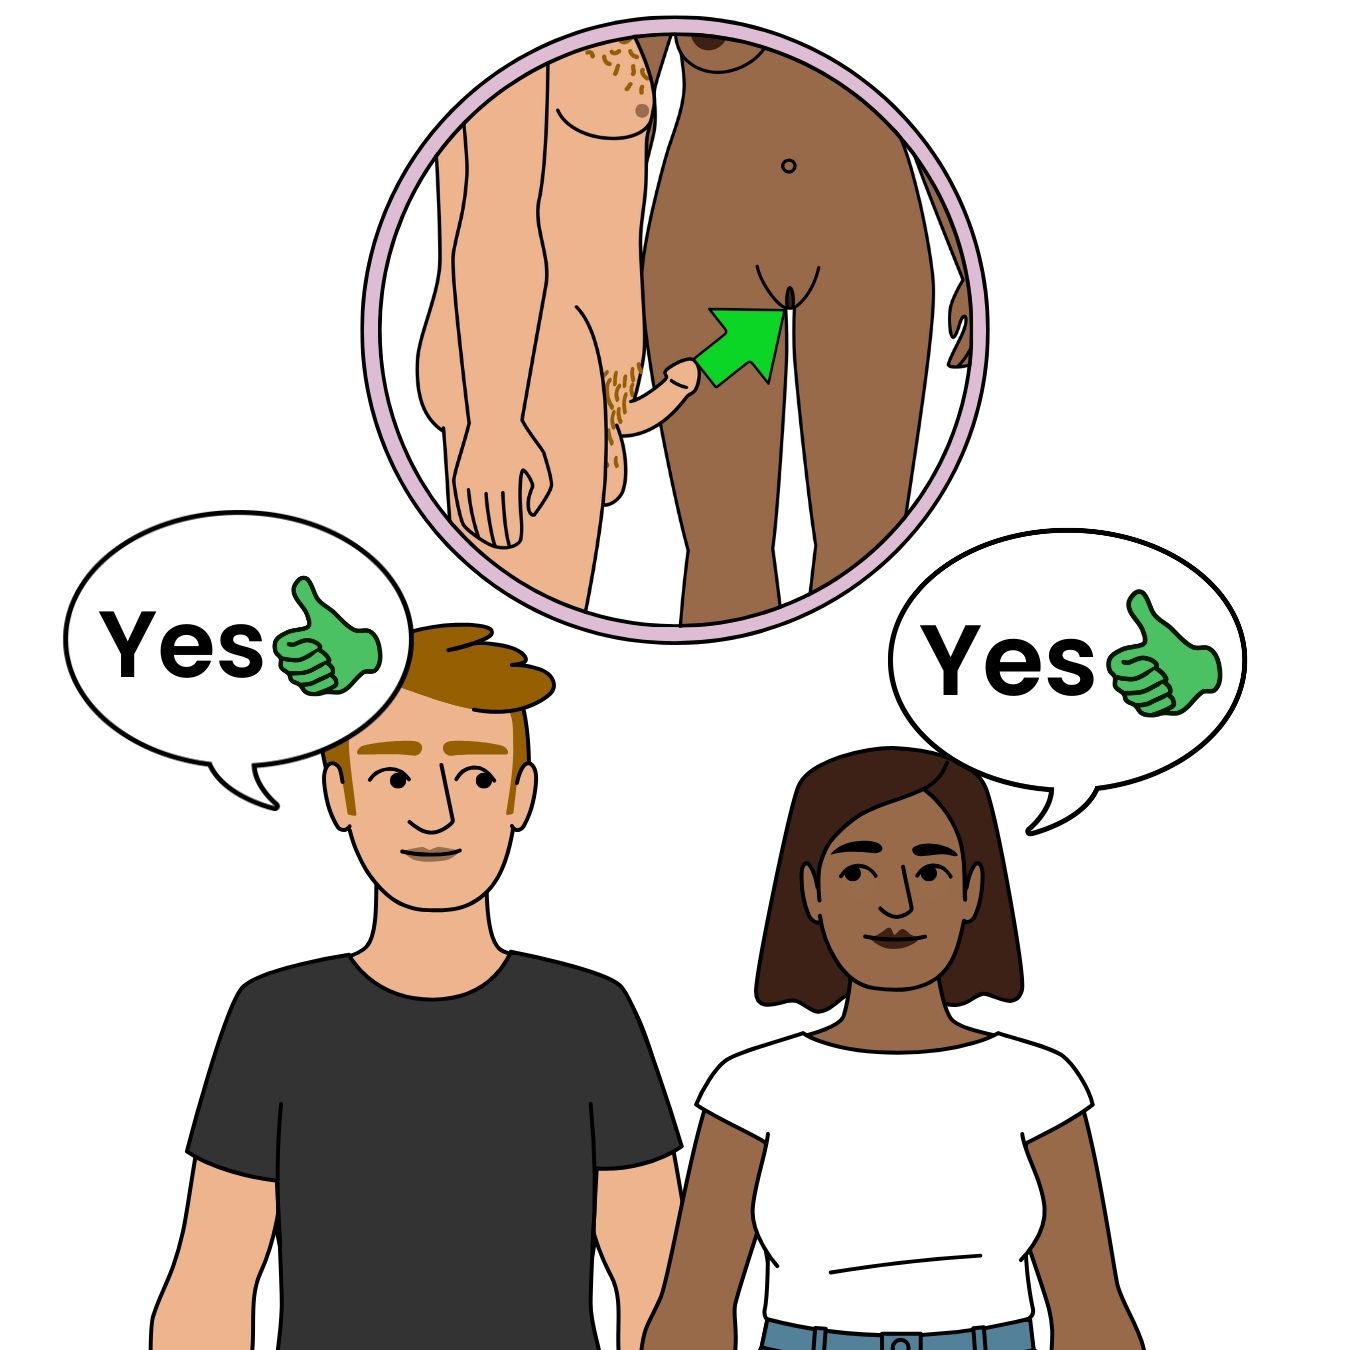 A drawing of a person with an erect penis standing side on. There is a green arrow pointing from their penis to the vulva of a person standing front on.